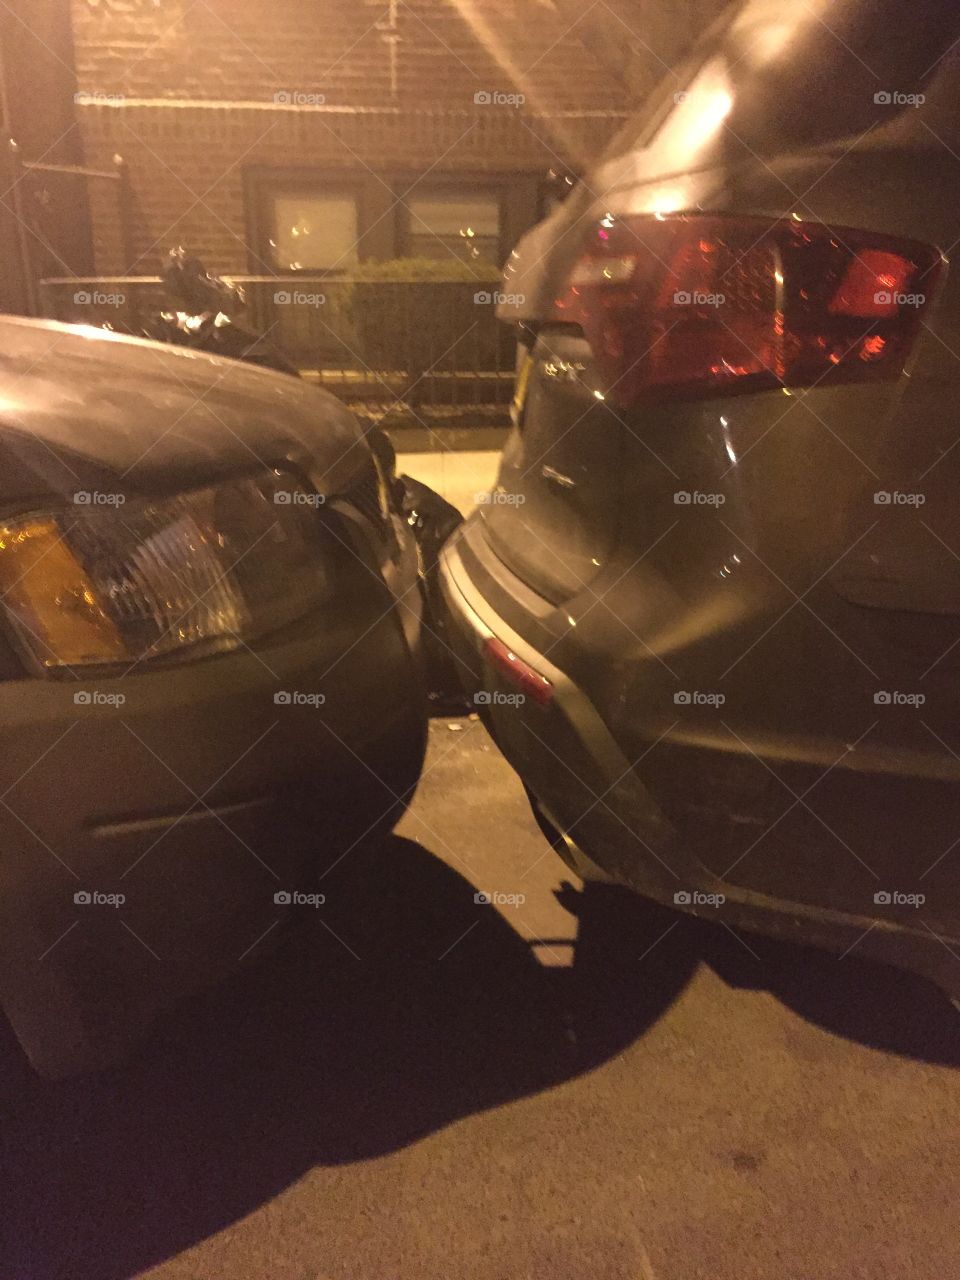 Can you get any closer? Parking in NYC